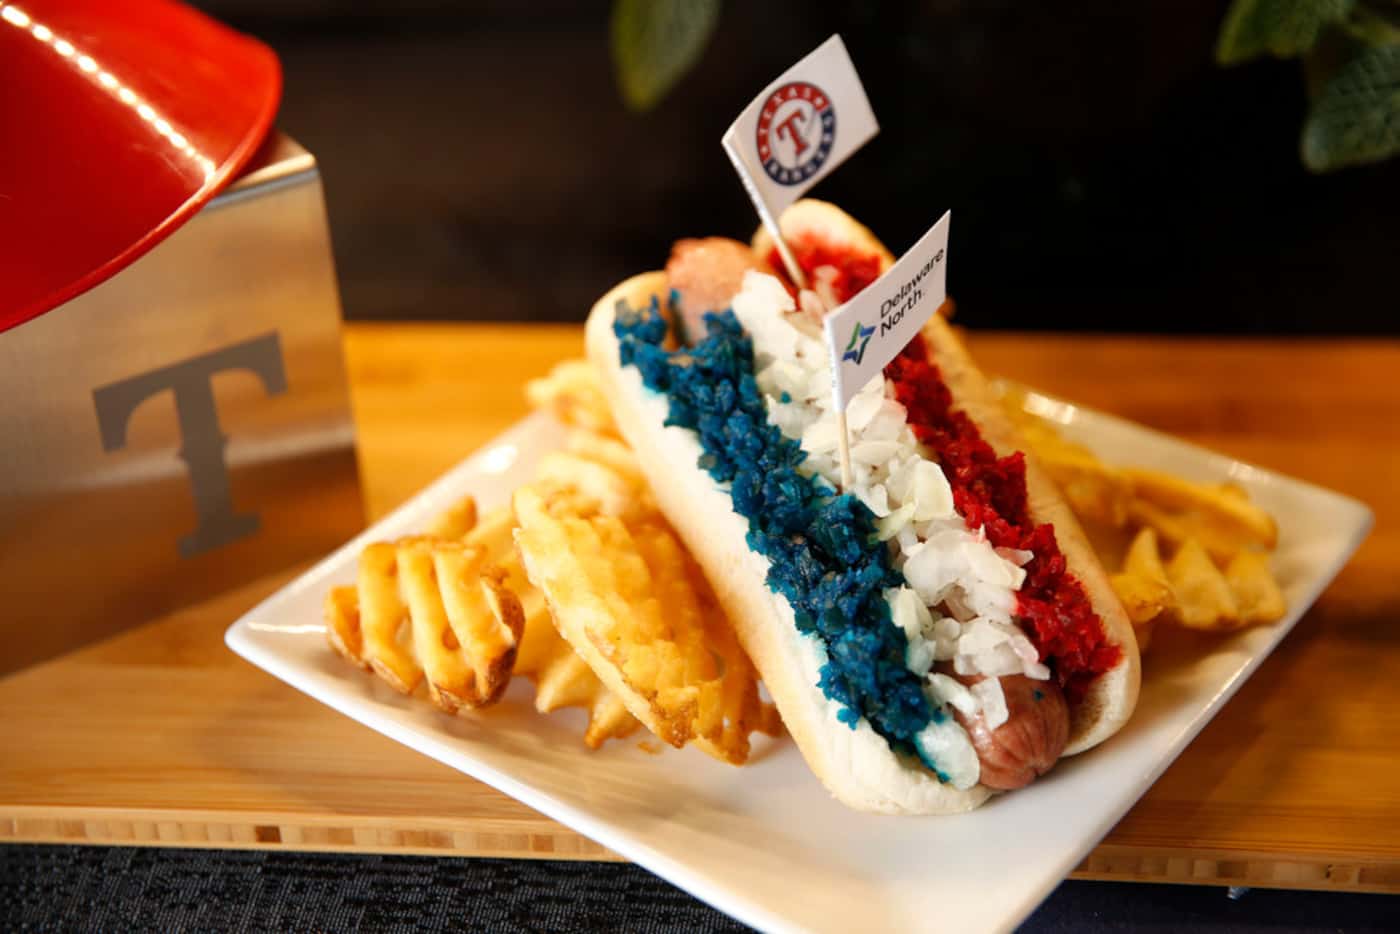 The RWB (Red White & Blue) Dog, using Best Maid Pickles, a combination of savory, sweet and...